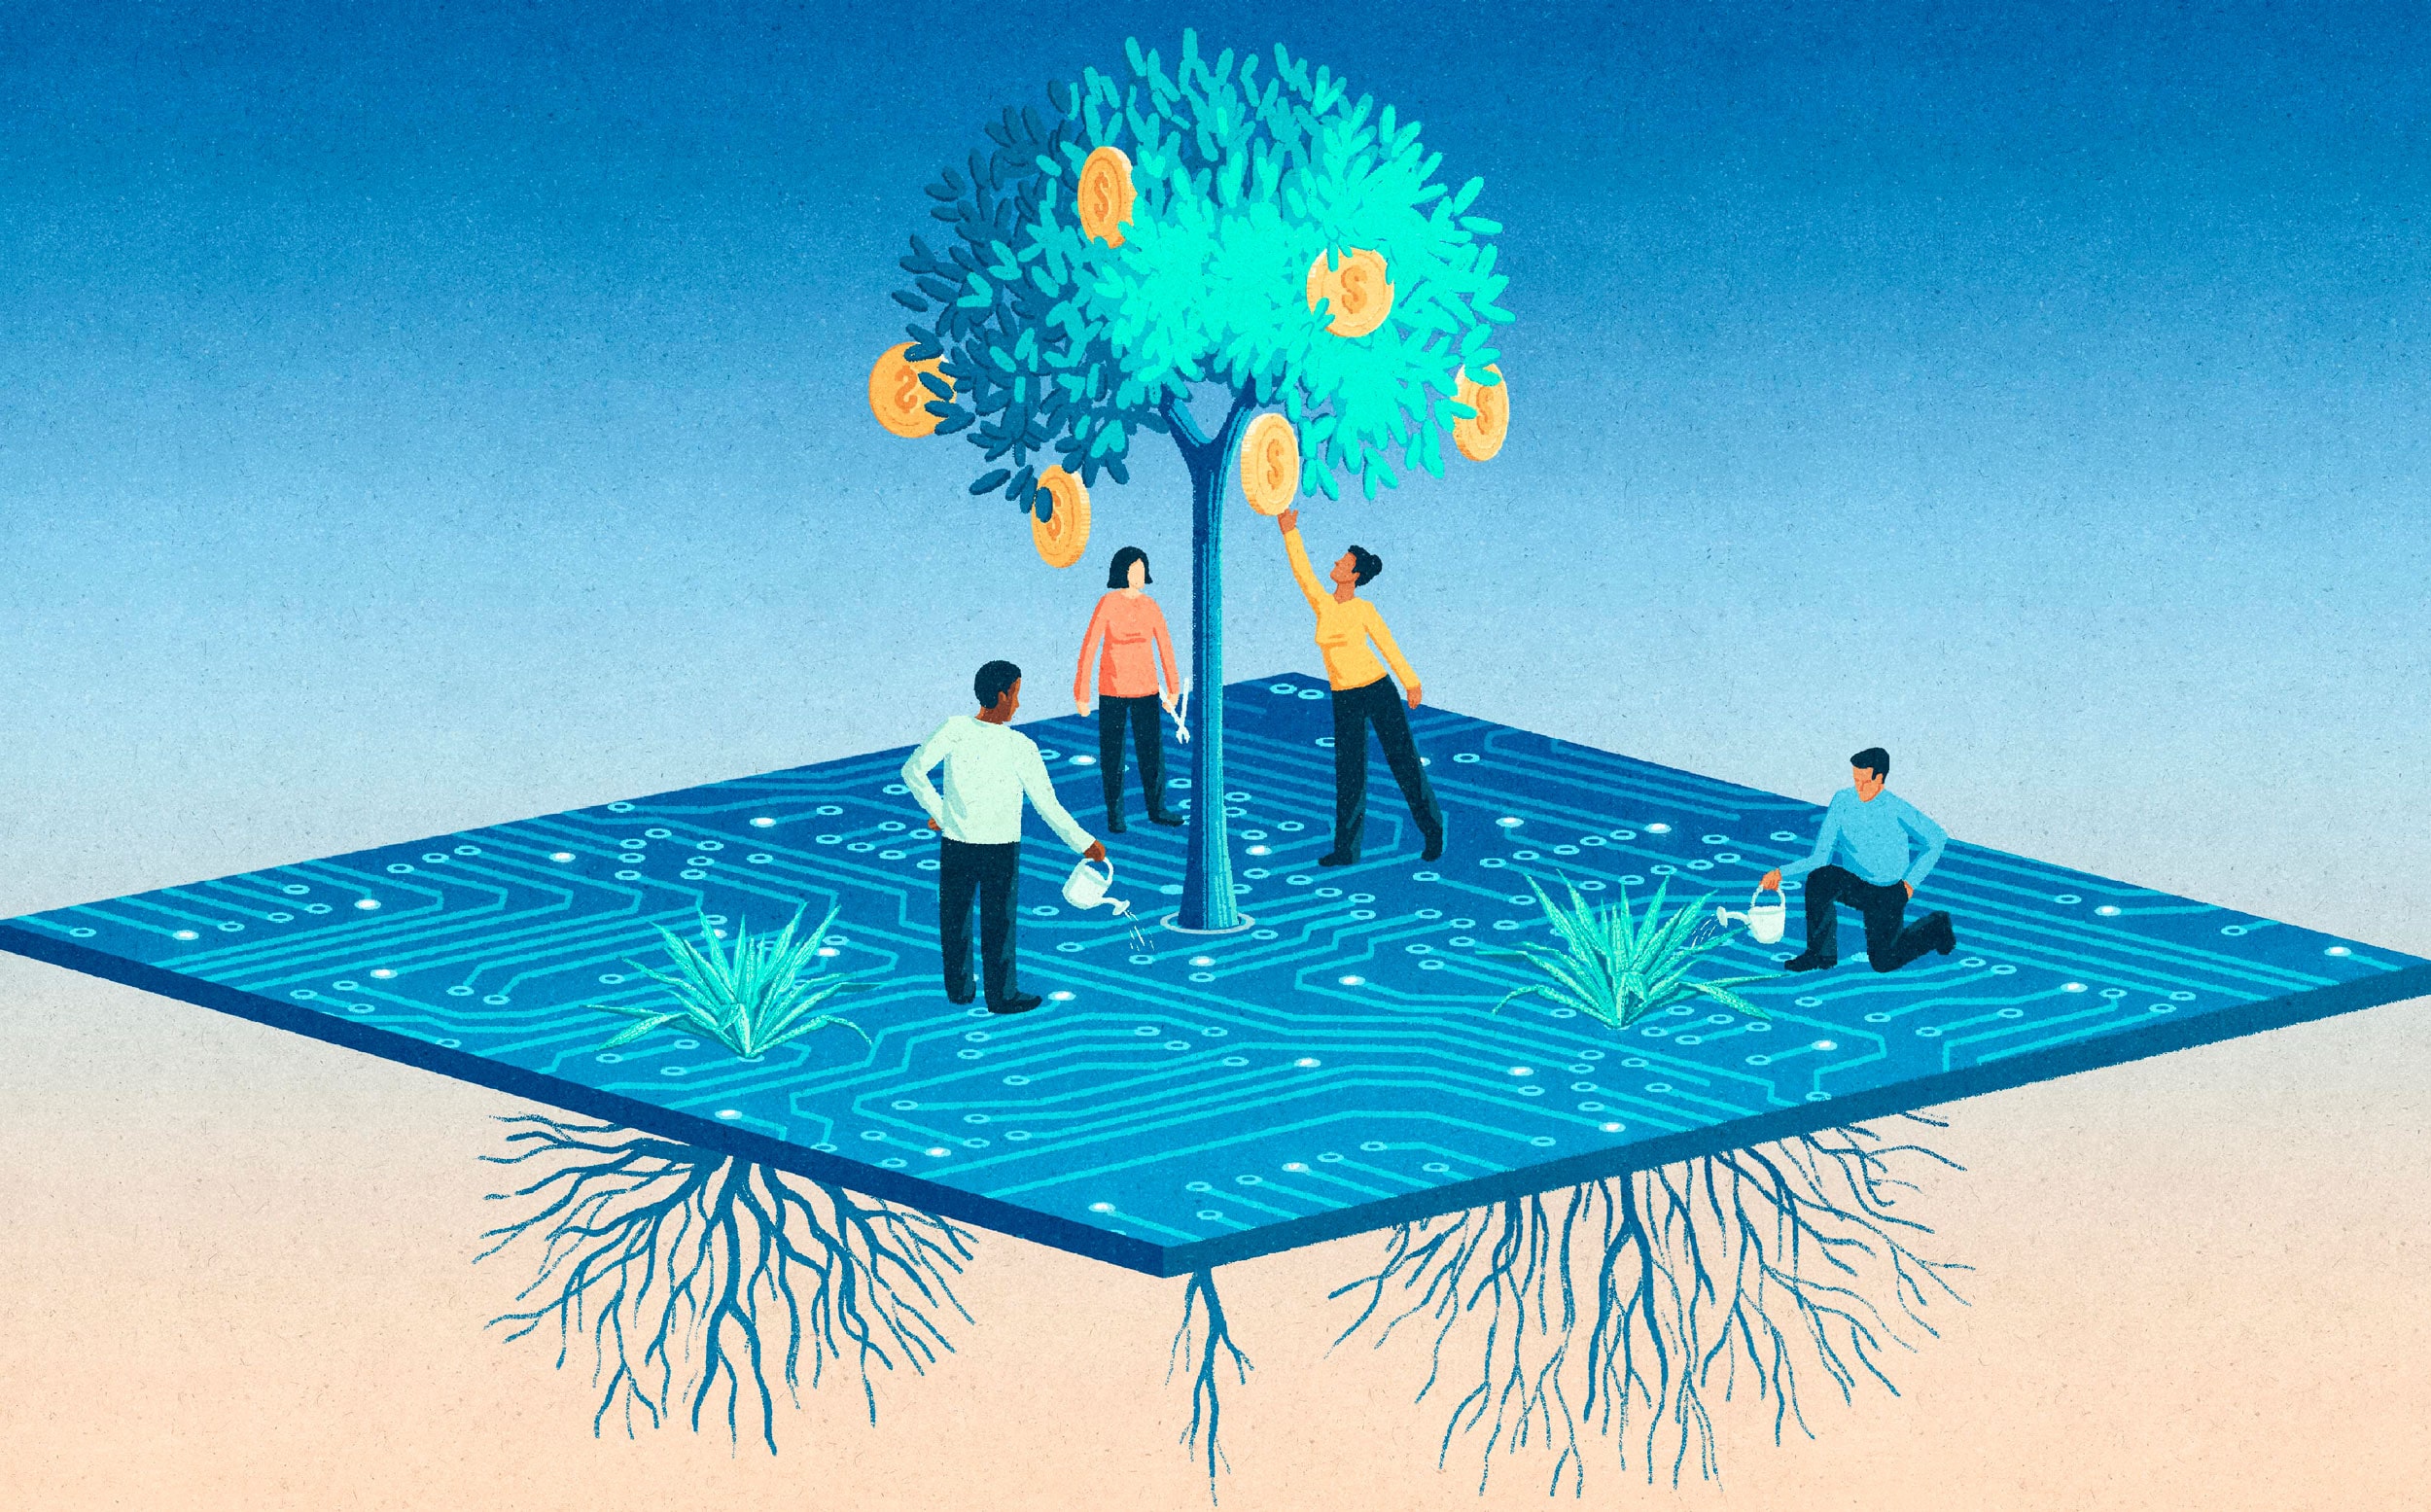 Illustration of people standing on a computer chip. Most of them are standing under a fast-growing money tree with poor roots, while one person waters a slow-growing plant with a strong root system.